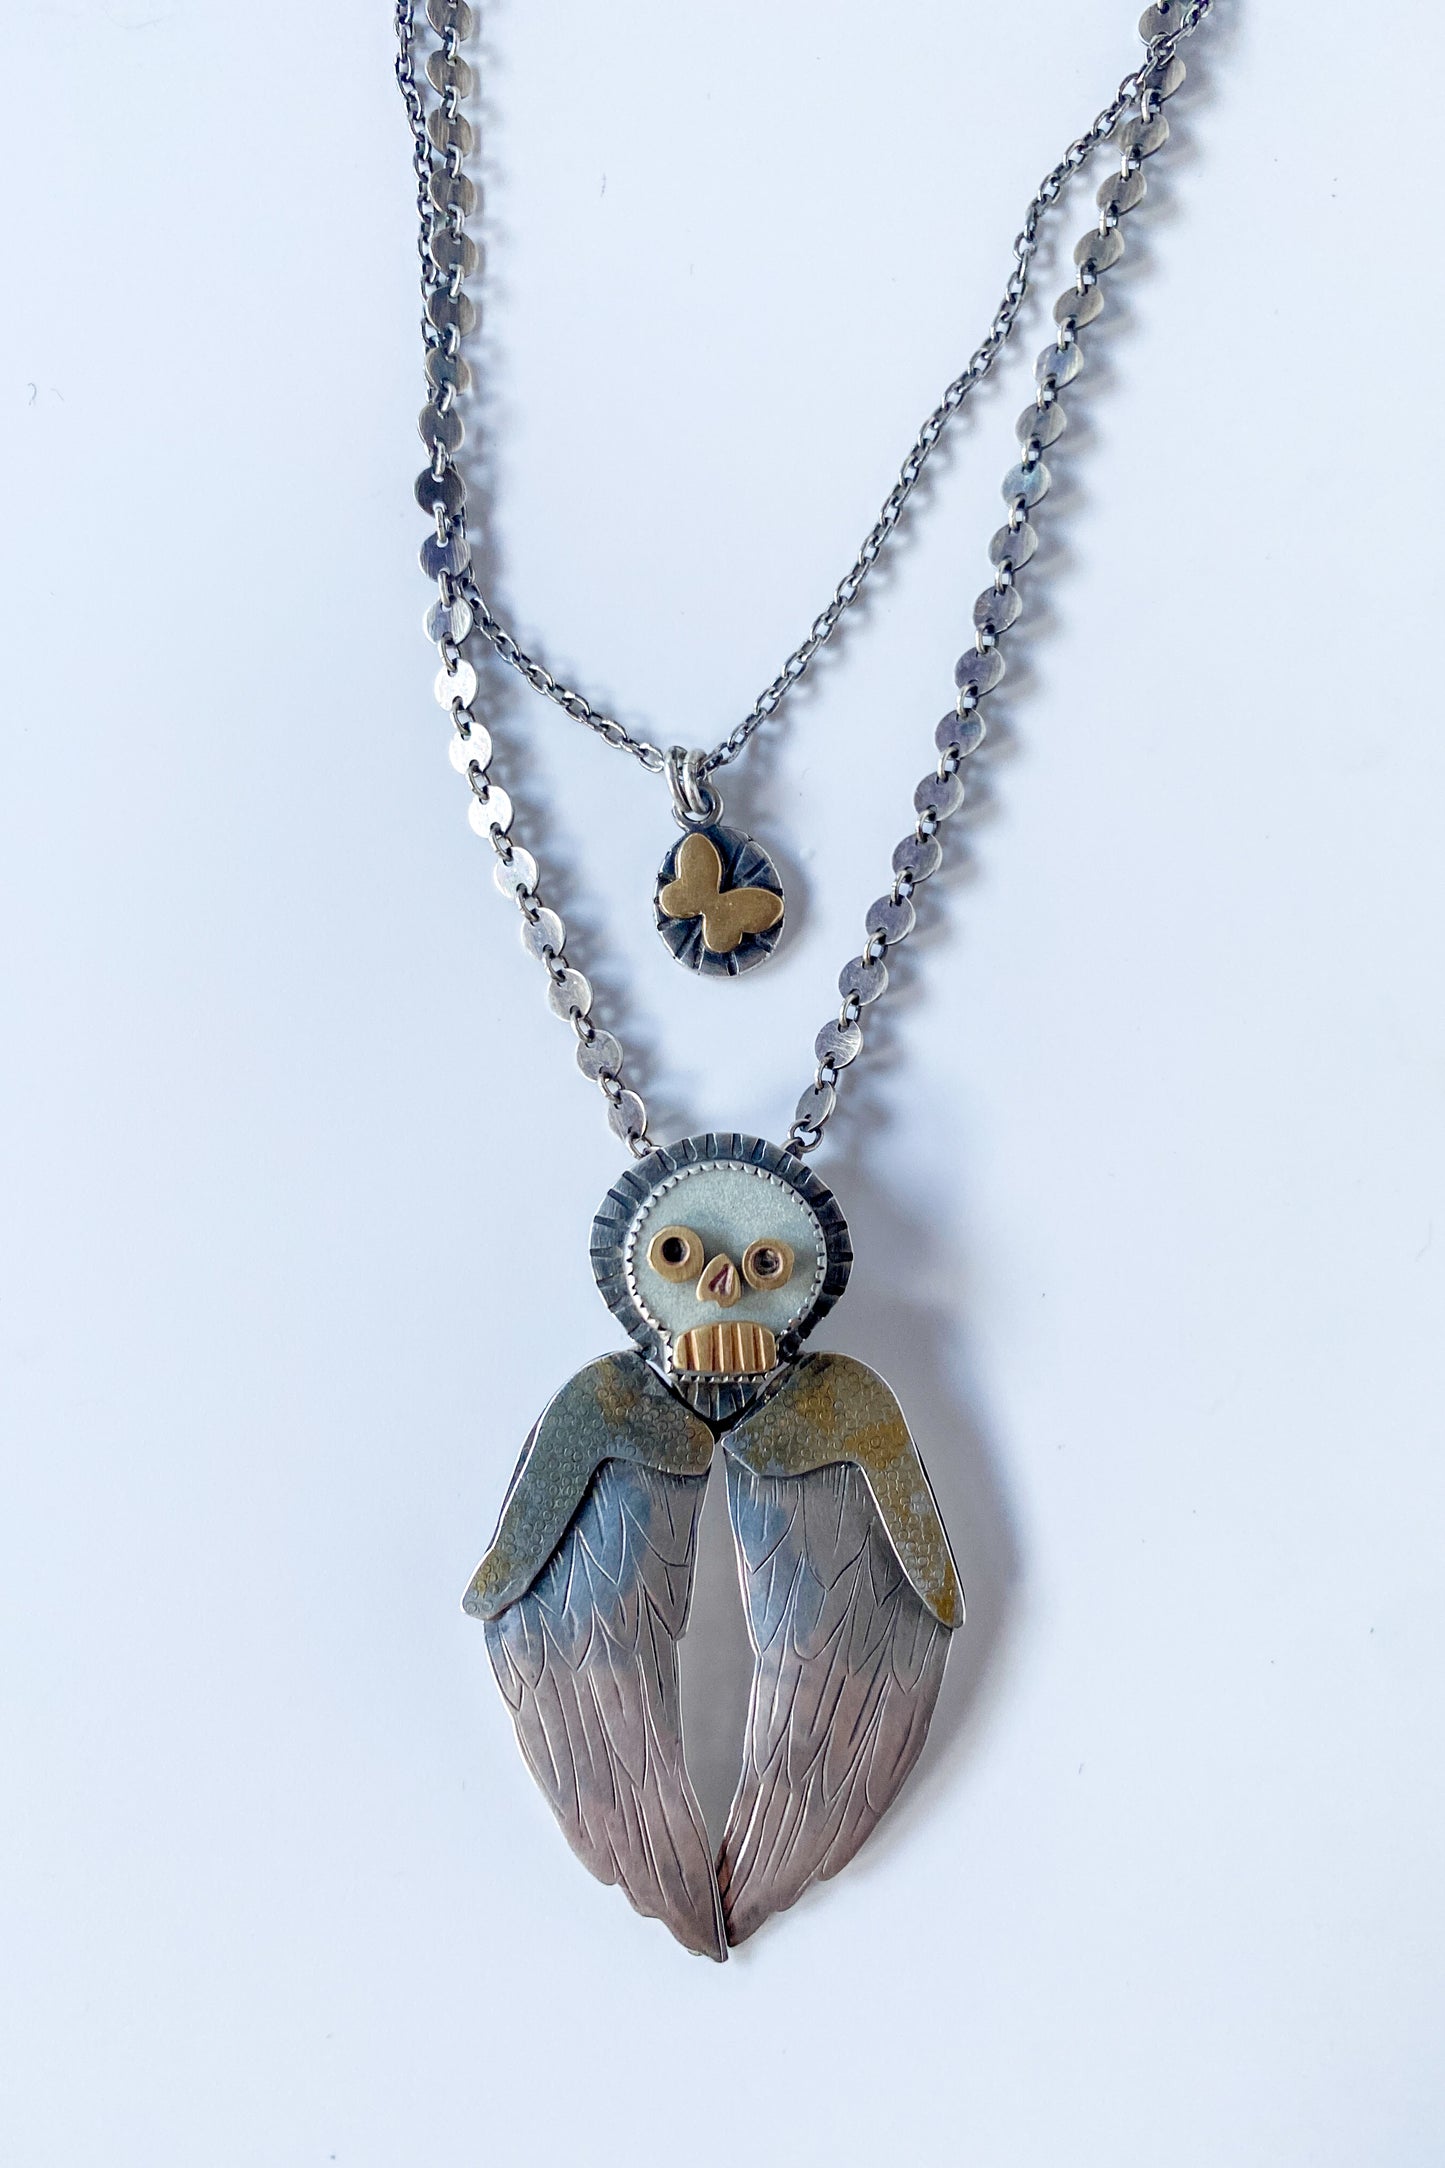 Winged skull necklace